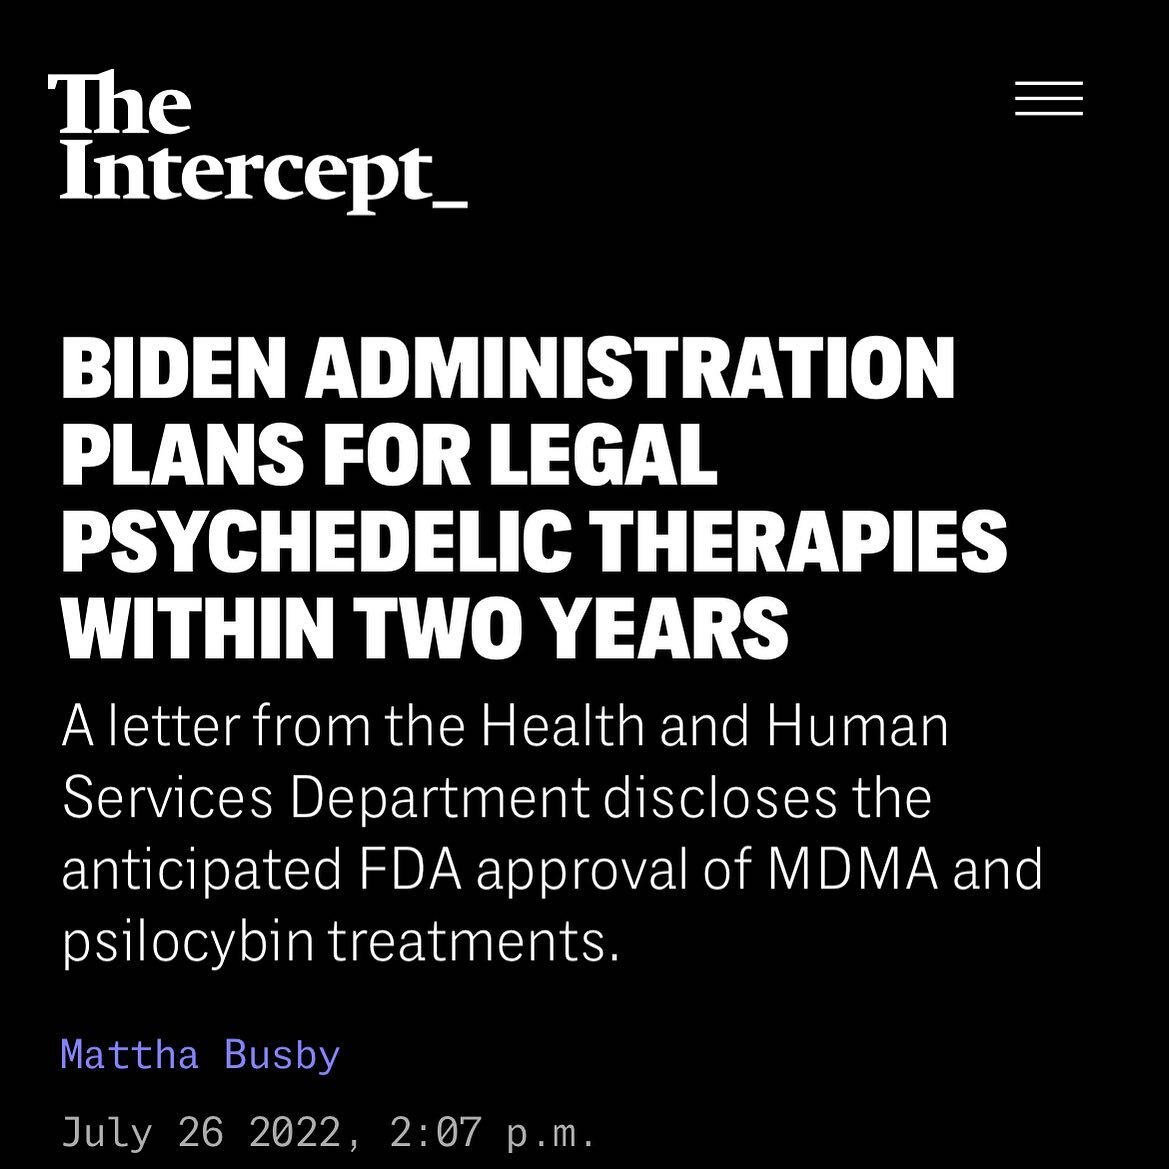 &ldquo;AS TWIN MENTAL HEALTH and drug misuse crises kill thousands of people per week, the potential of psychedelic-assisted therapies &ldquo;must be explored,&rdquo; urges a federal letter on behalf of the U.S. health secretary and shared with The I